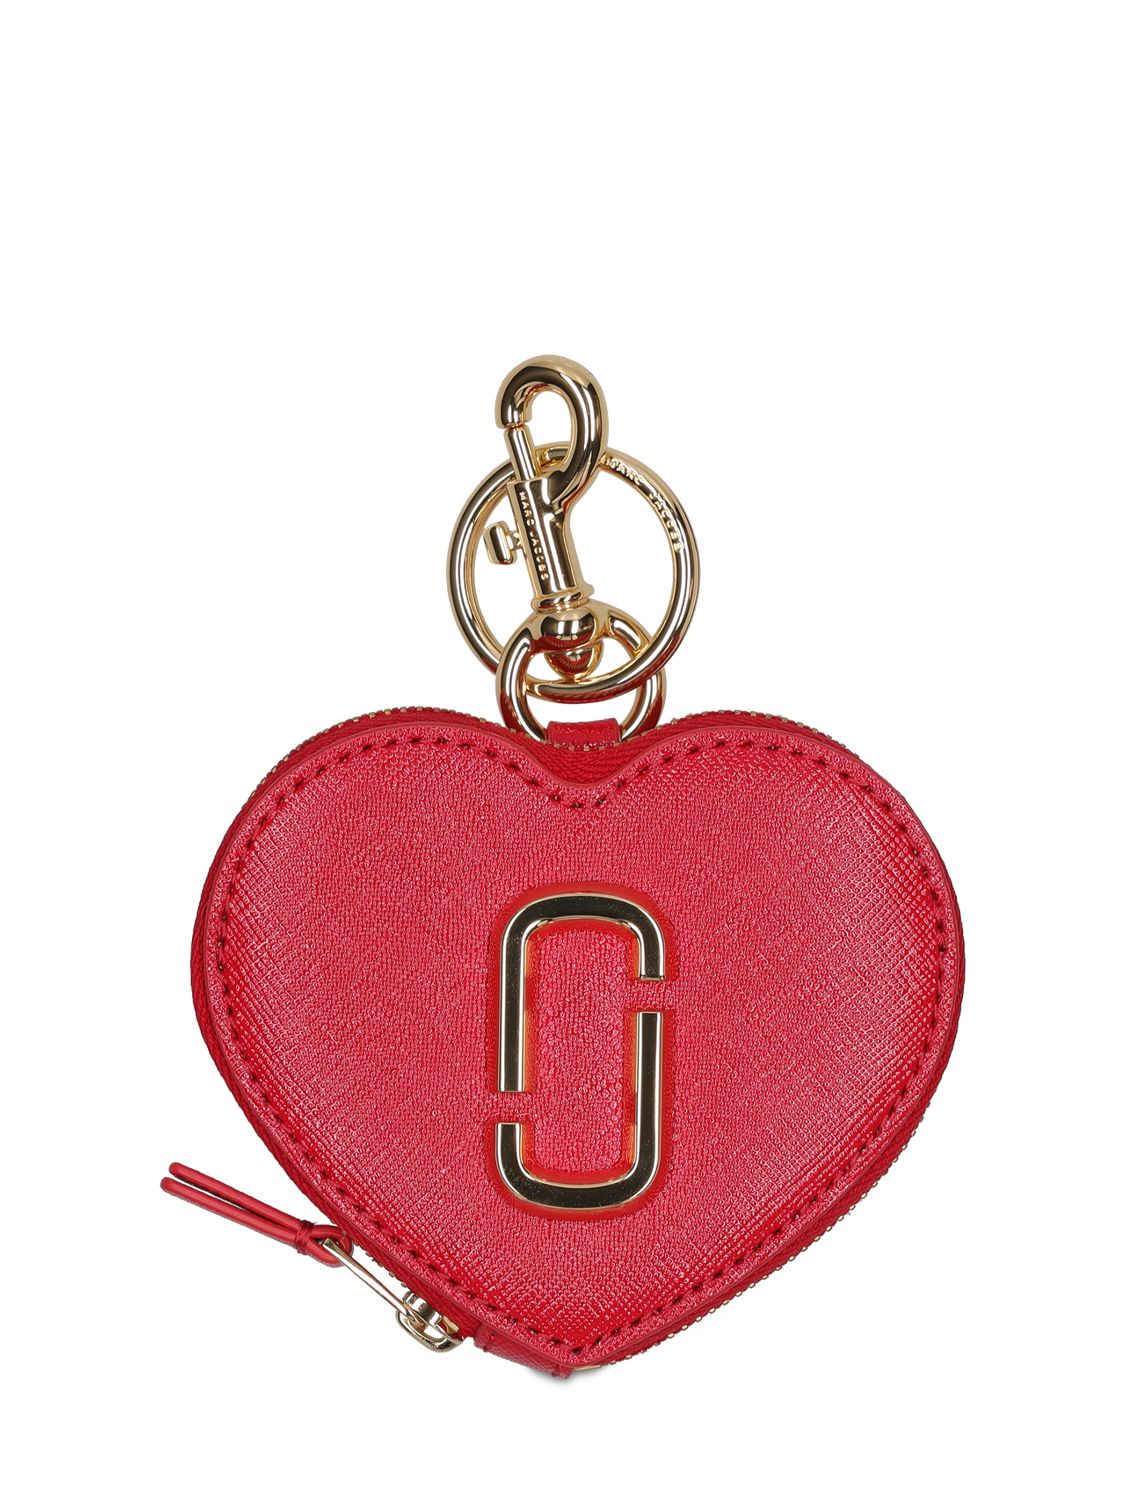 The Heart Leather Pouch